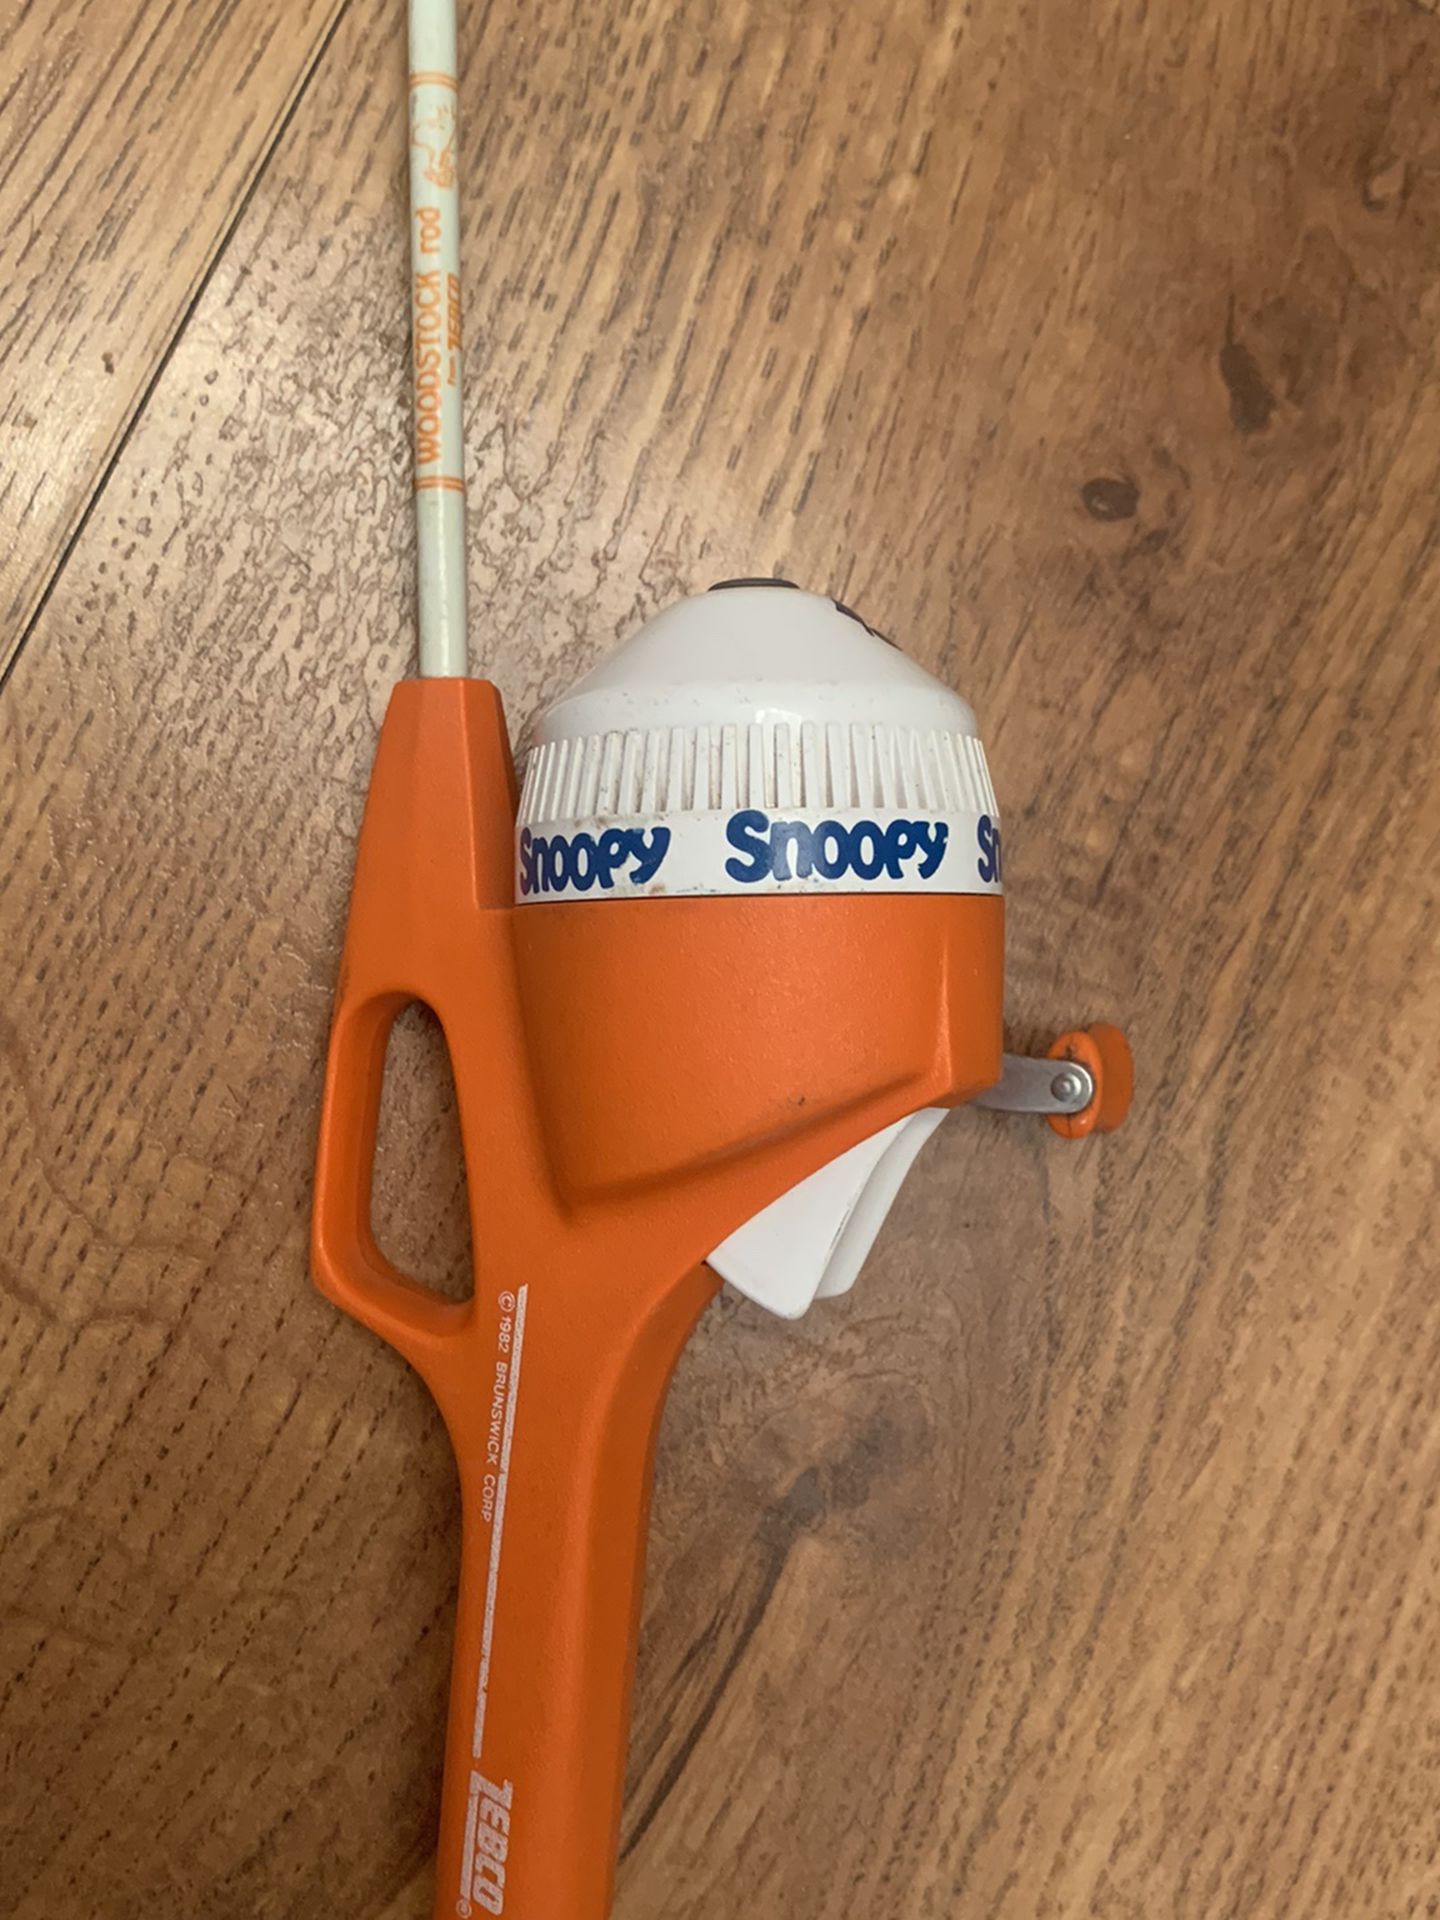 1982 Zebco Woodstock Rod Snoopy Fishing Pole for Sale in Aurora